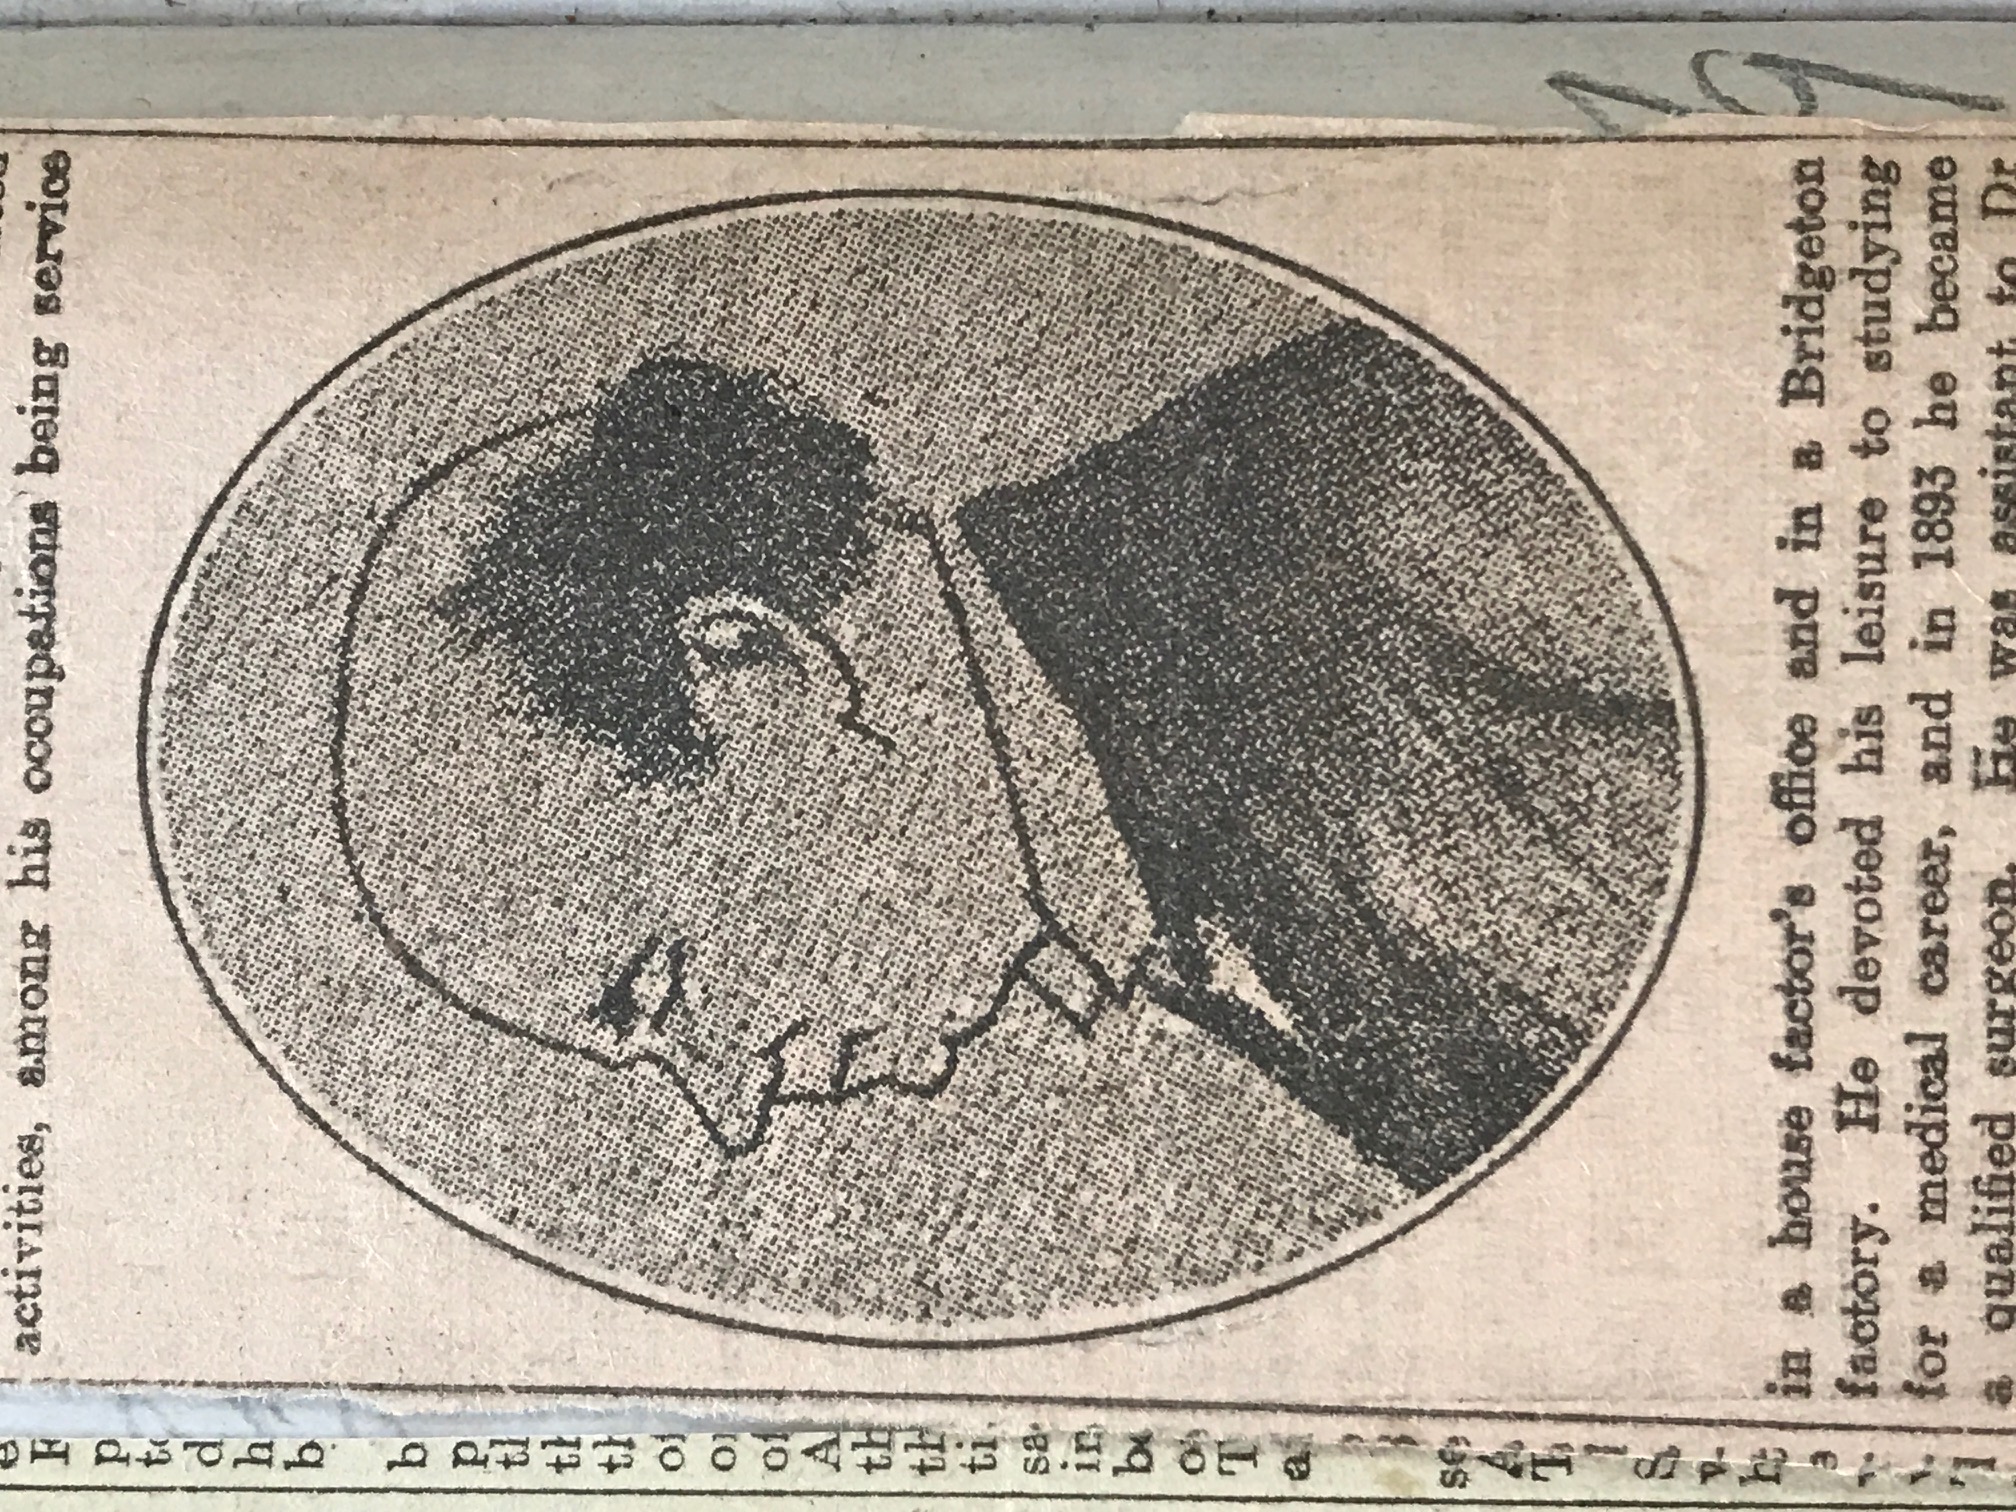 Illustration of Dr James Devon from a newspaper clipping